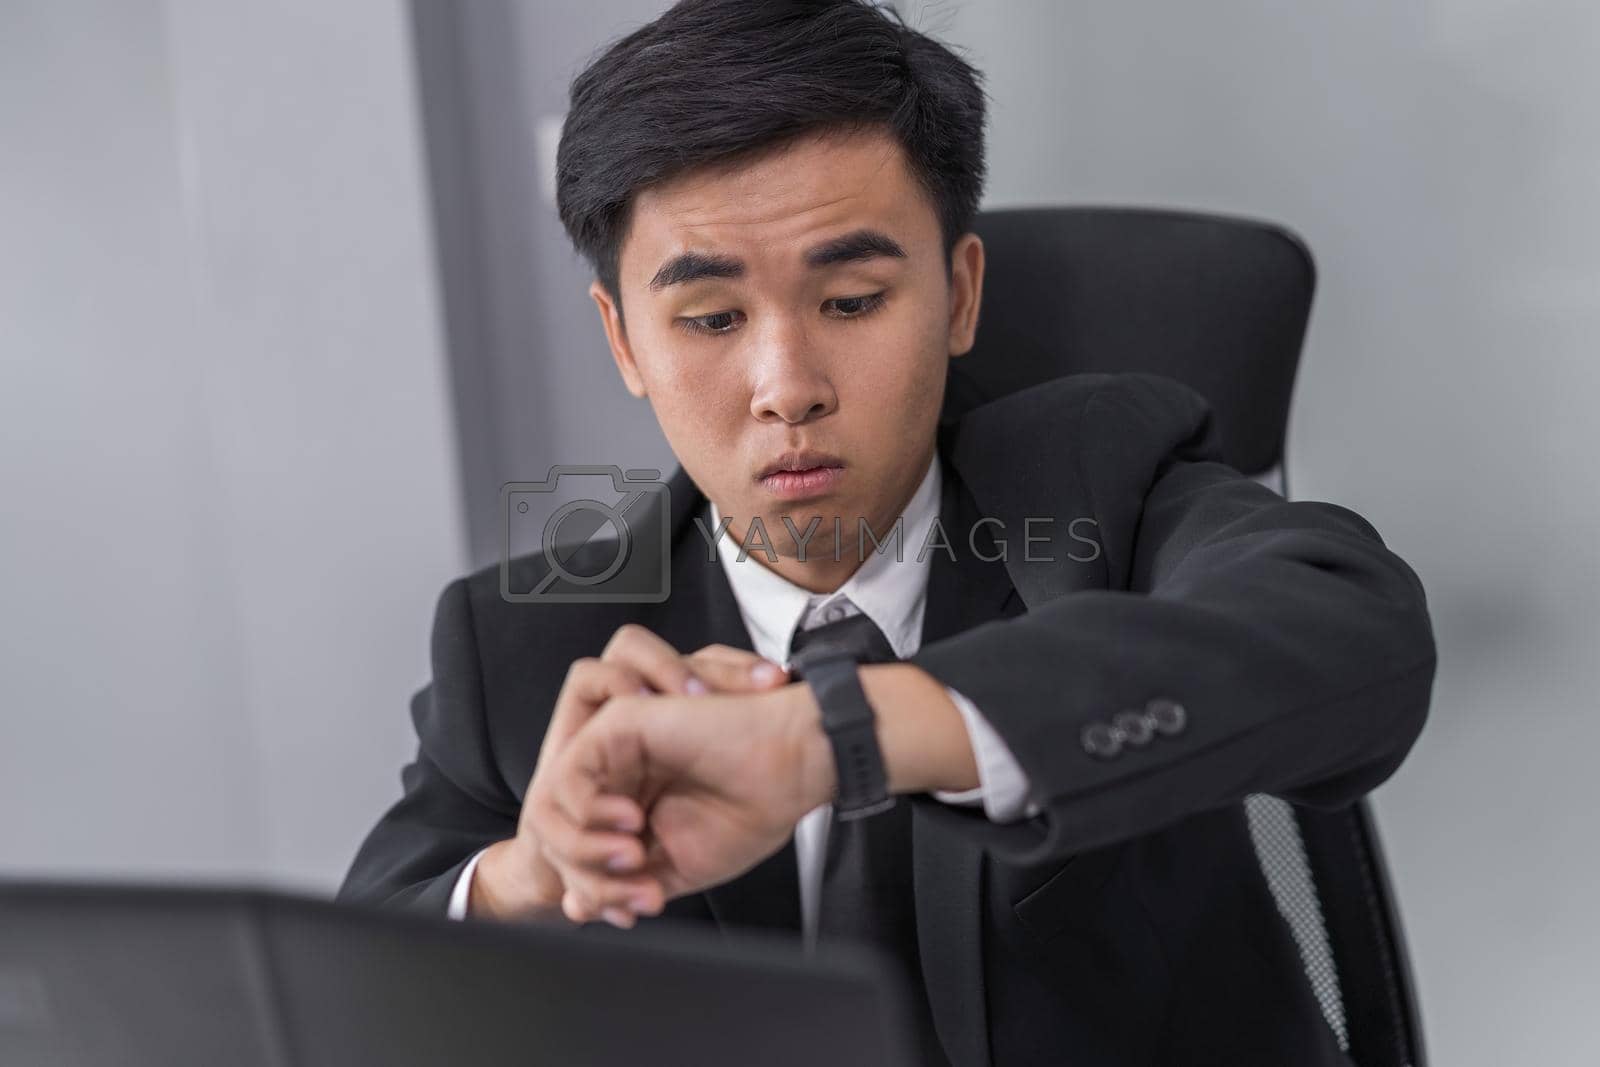 Royalty free image of business man checking time on watch while using laptop by geargodz